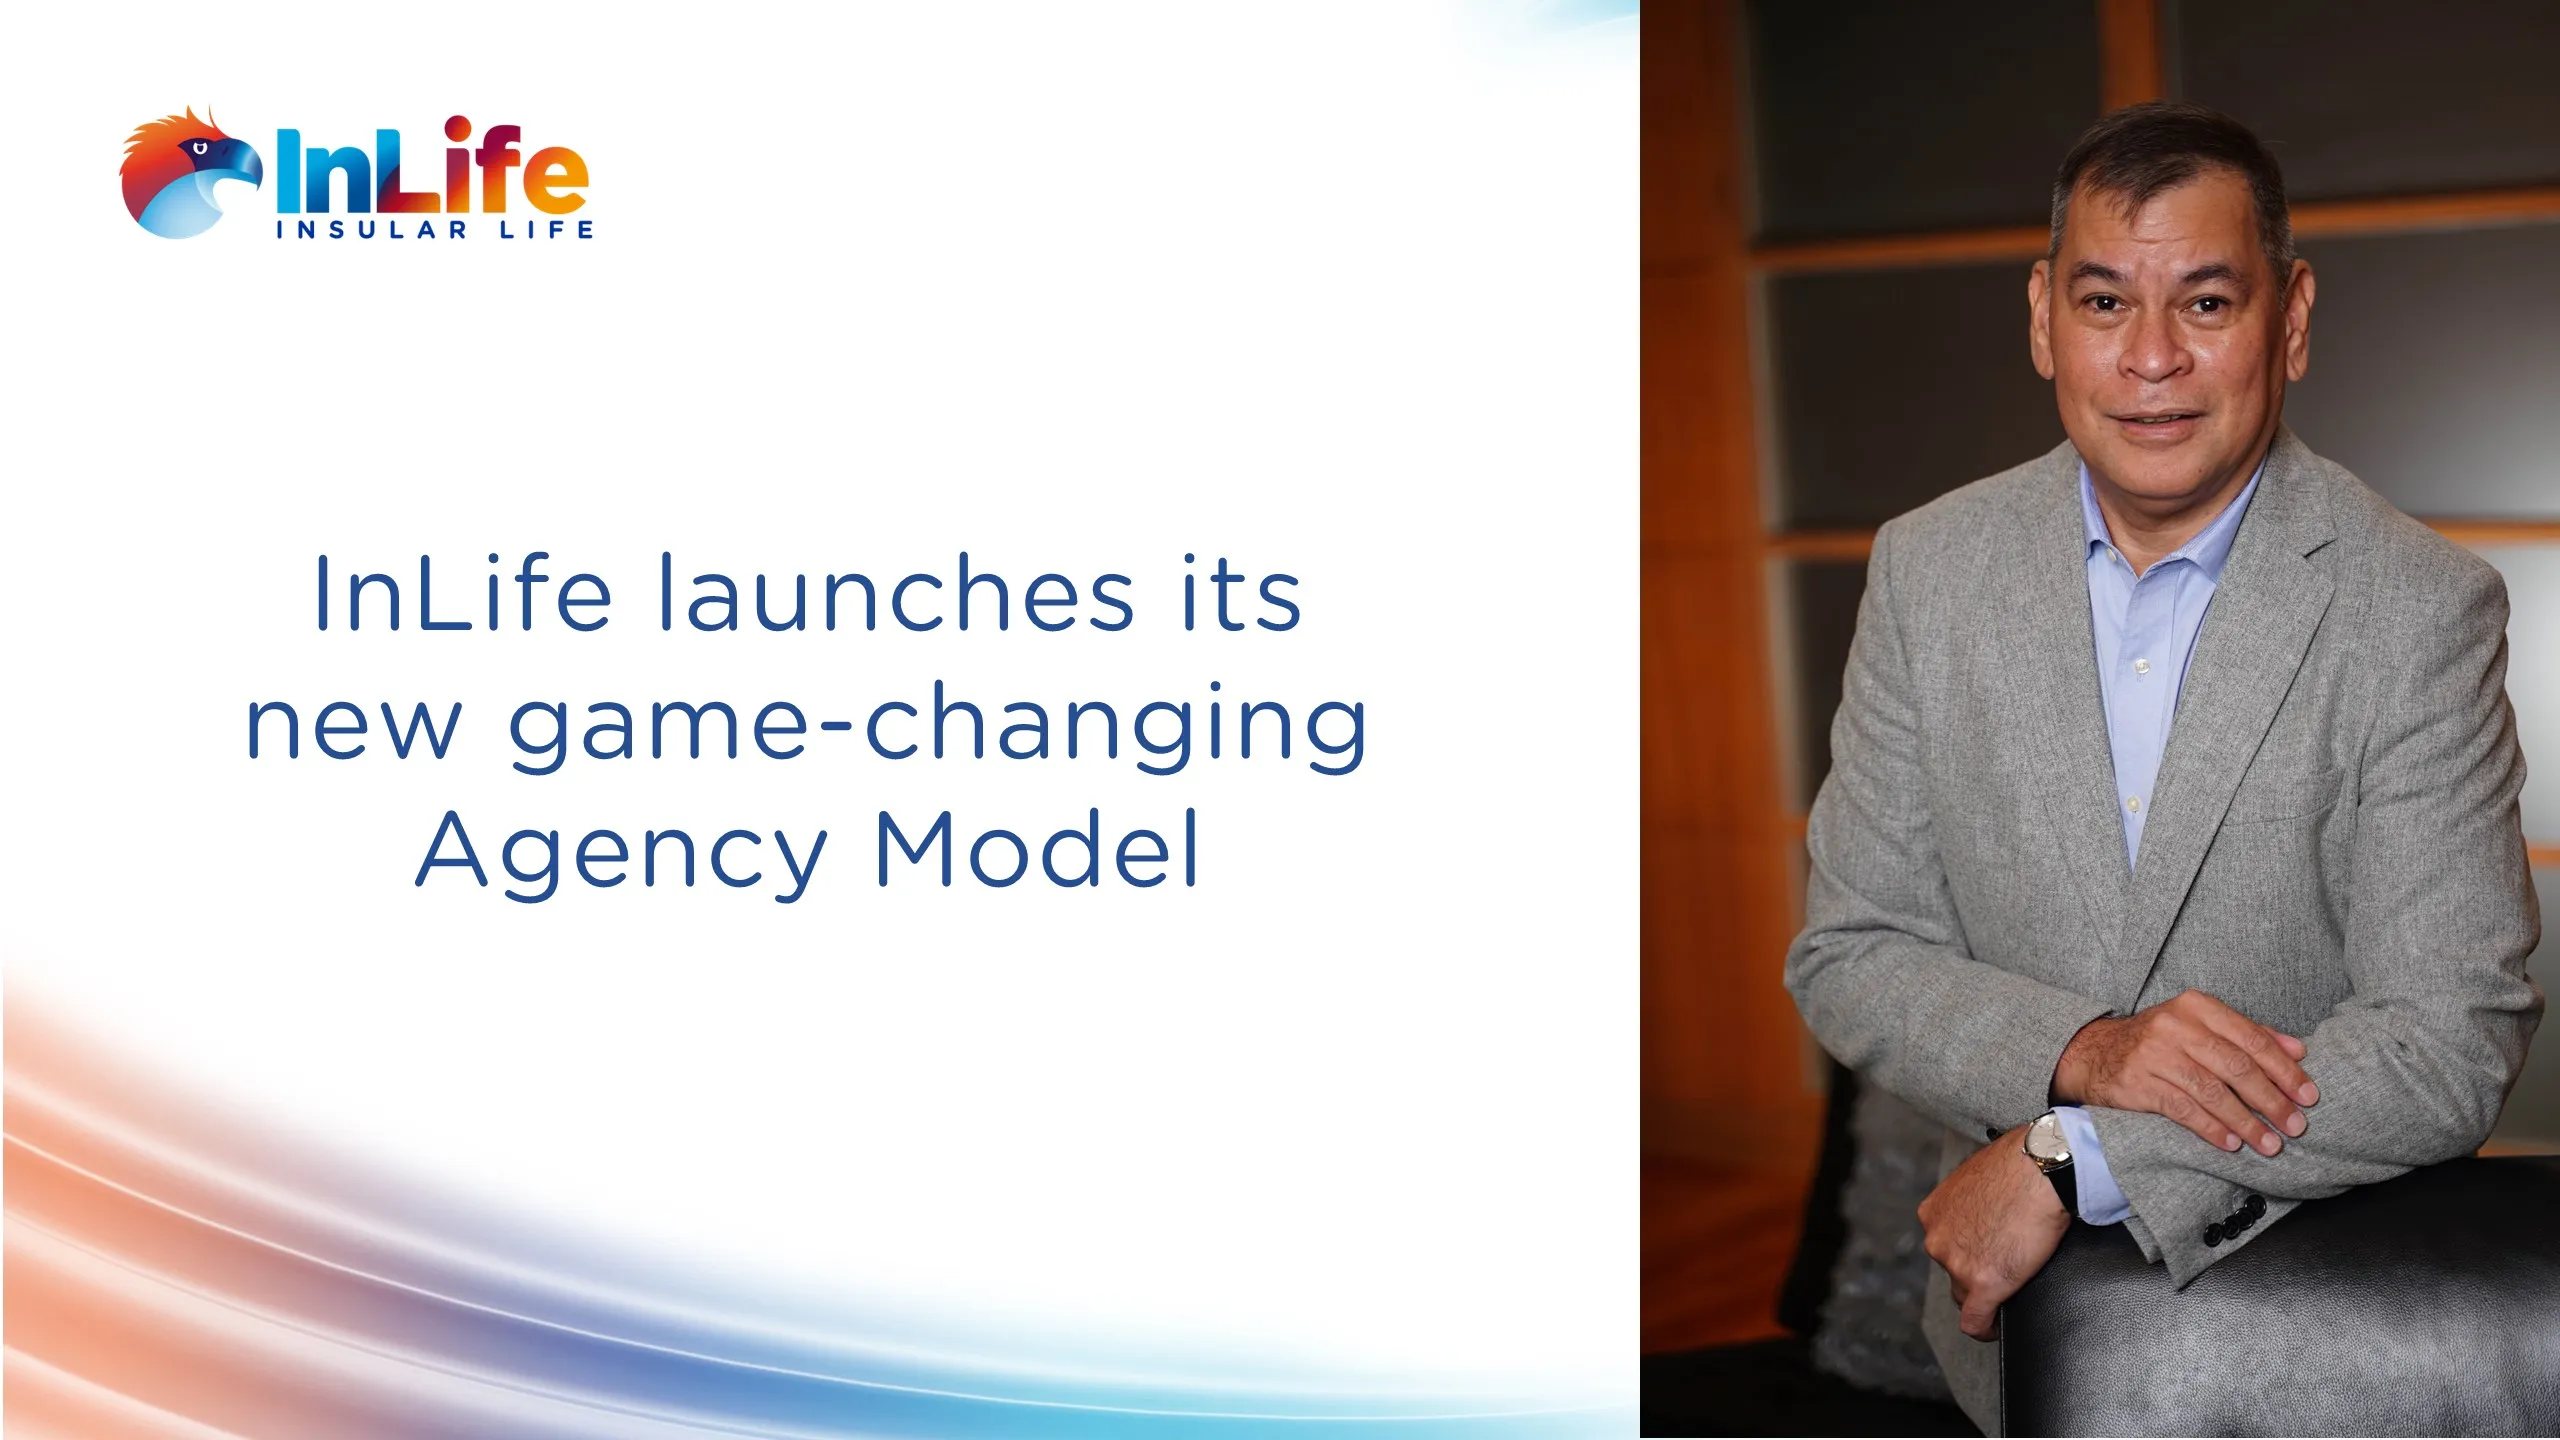 inlife-launches-its-new-game-changing-agency-model